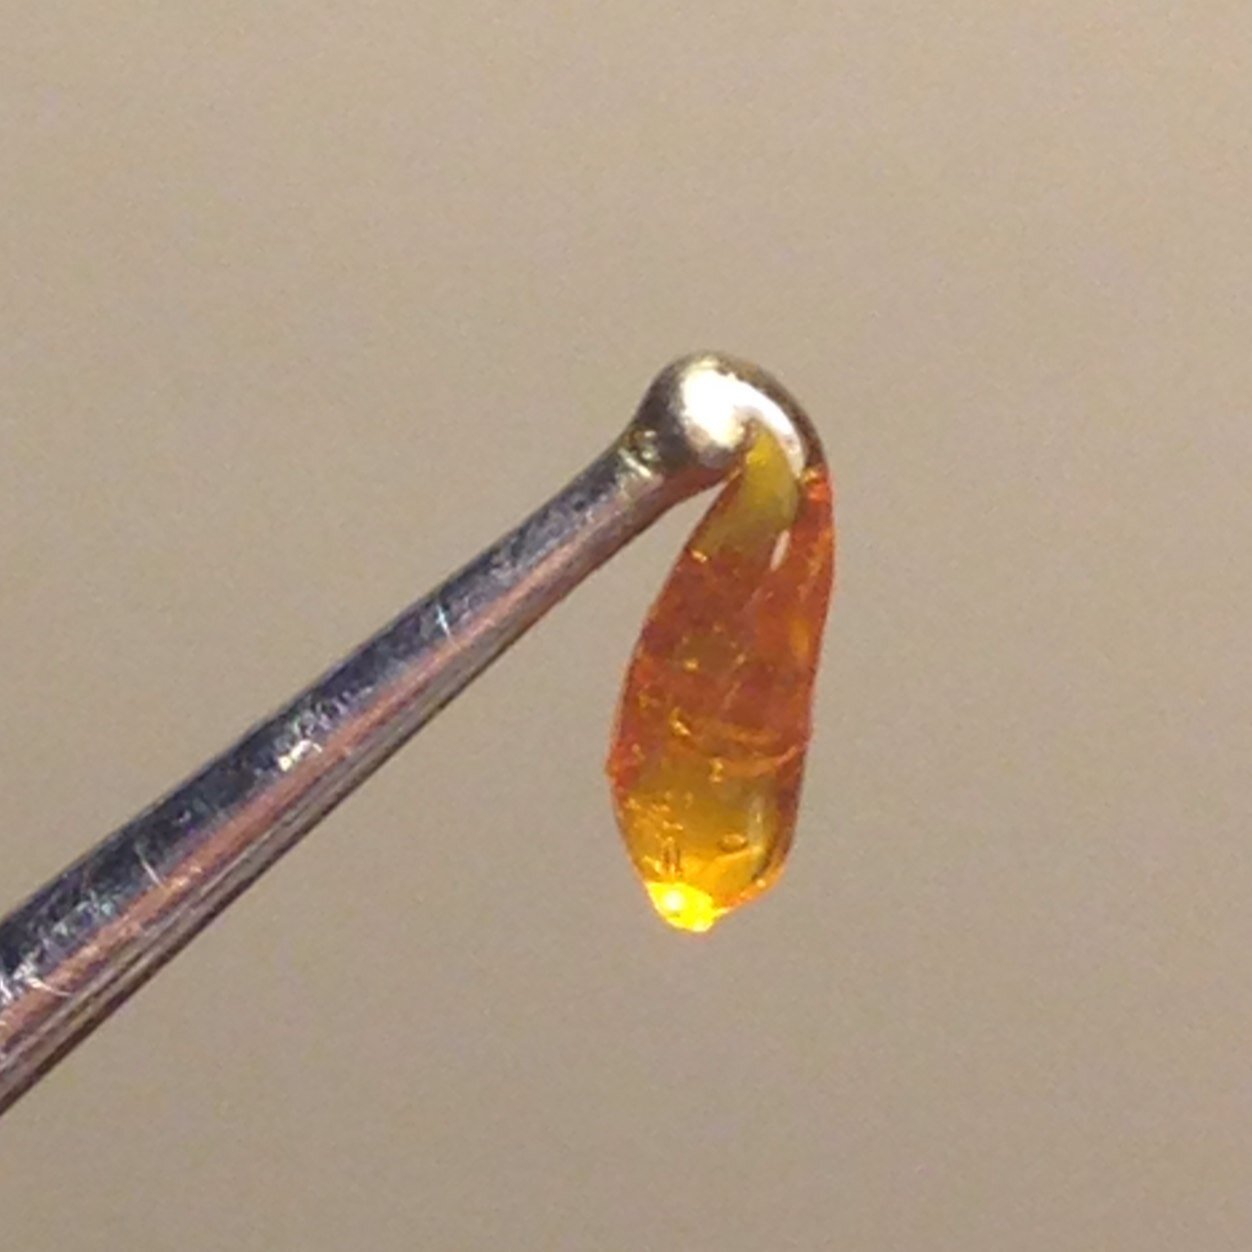 Daily news, reviews, and pics of BHO, Wax, Shatter, CO2, Oils, Hash, solventfree, extractions